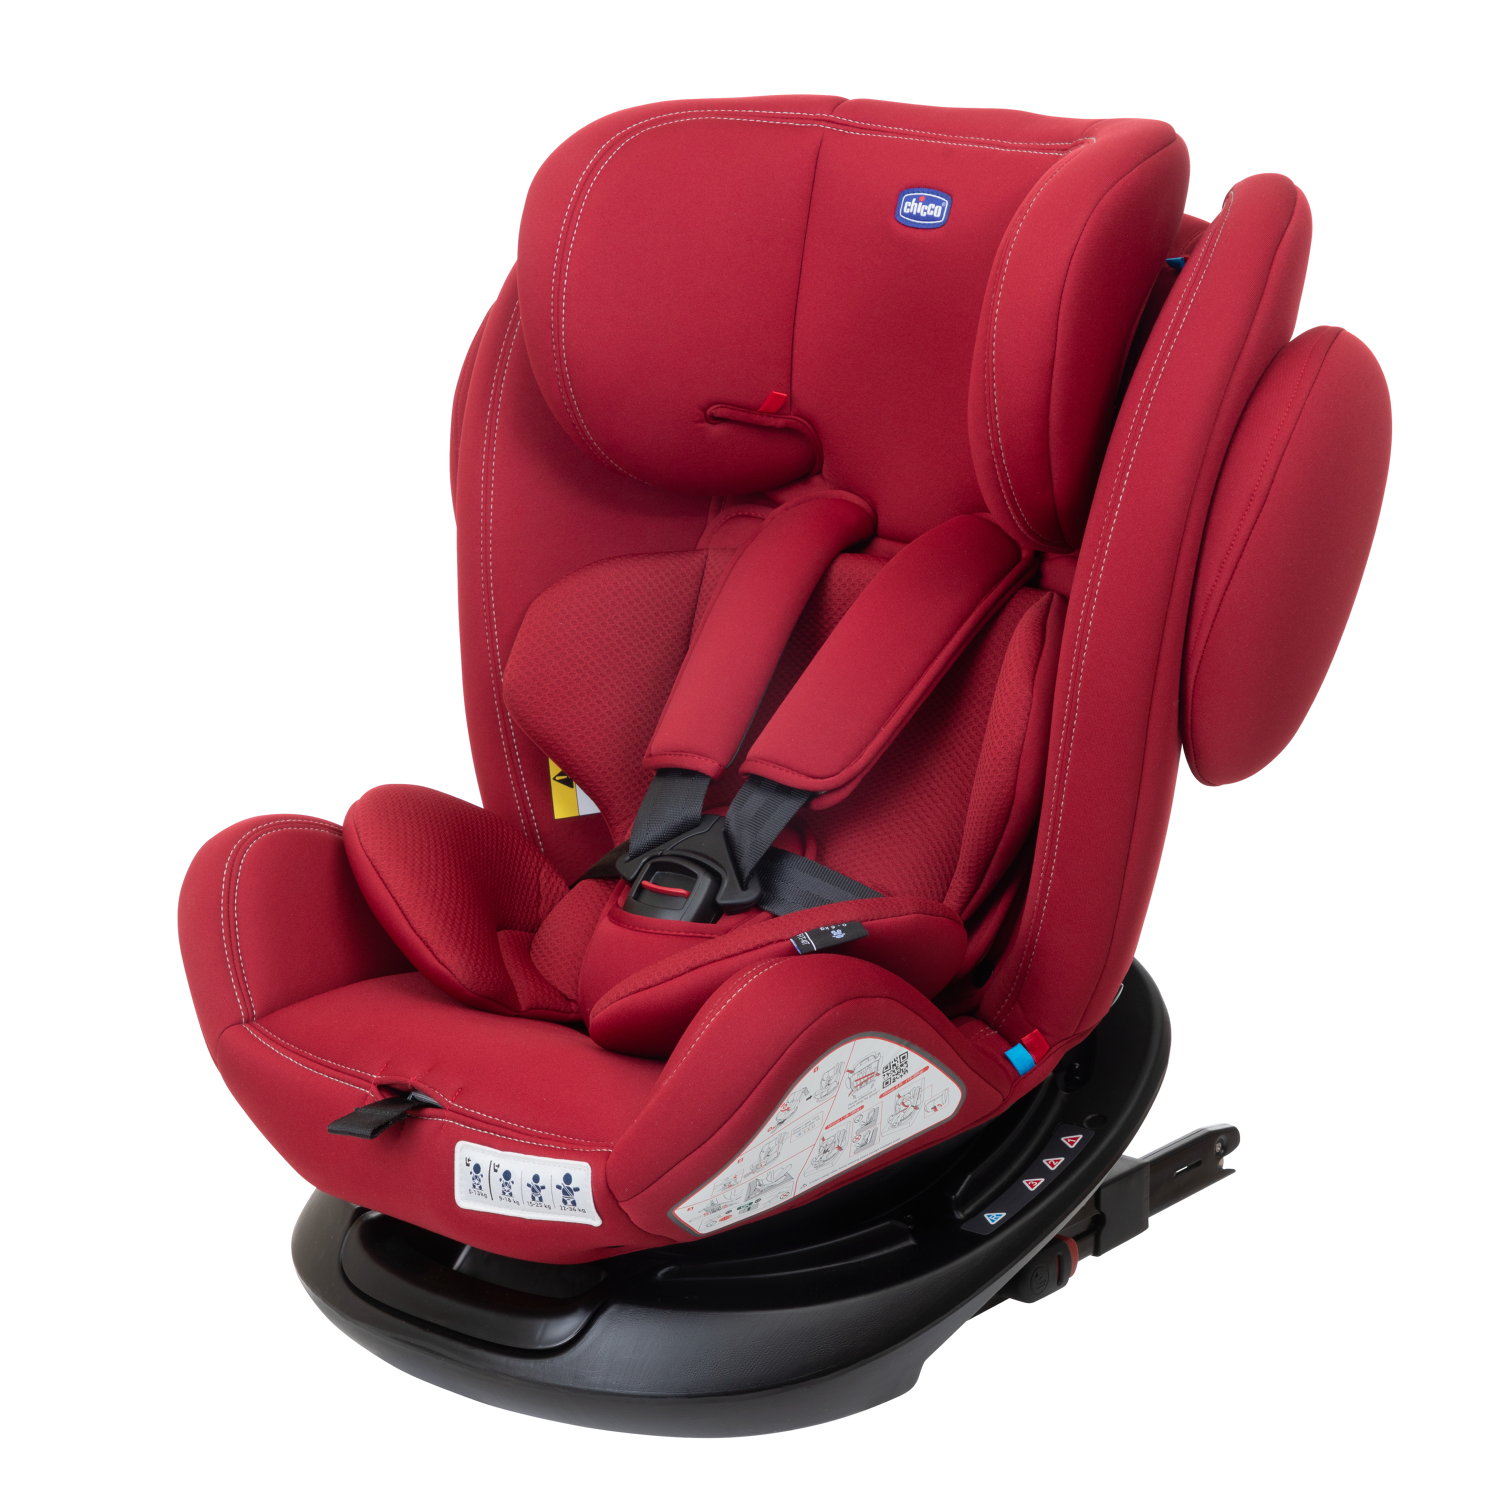 Is crying ghost Plow Scaun auto cu Isofix 9-36 kg